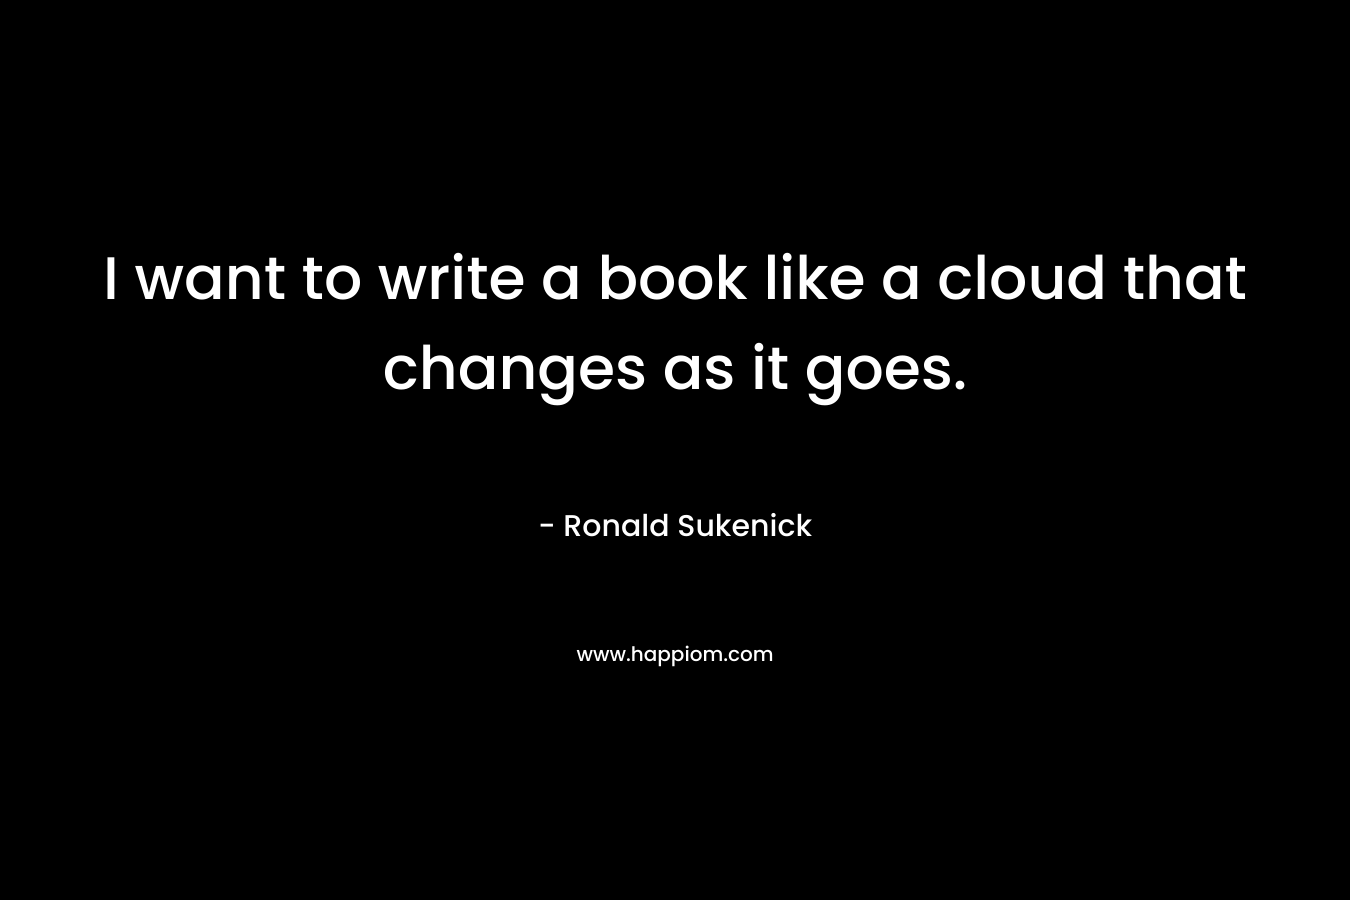 I want to write a book like a cloud that changes as it goes. – Ronald Sukenick